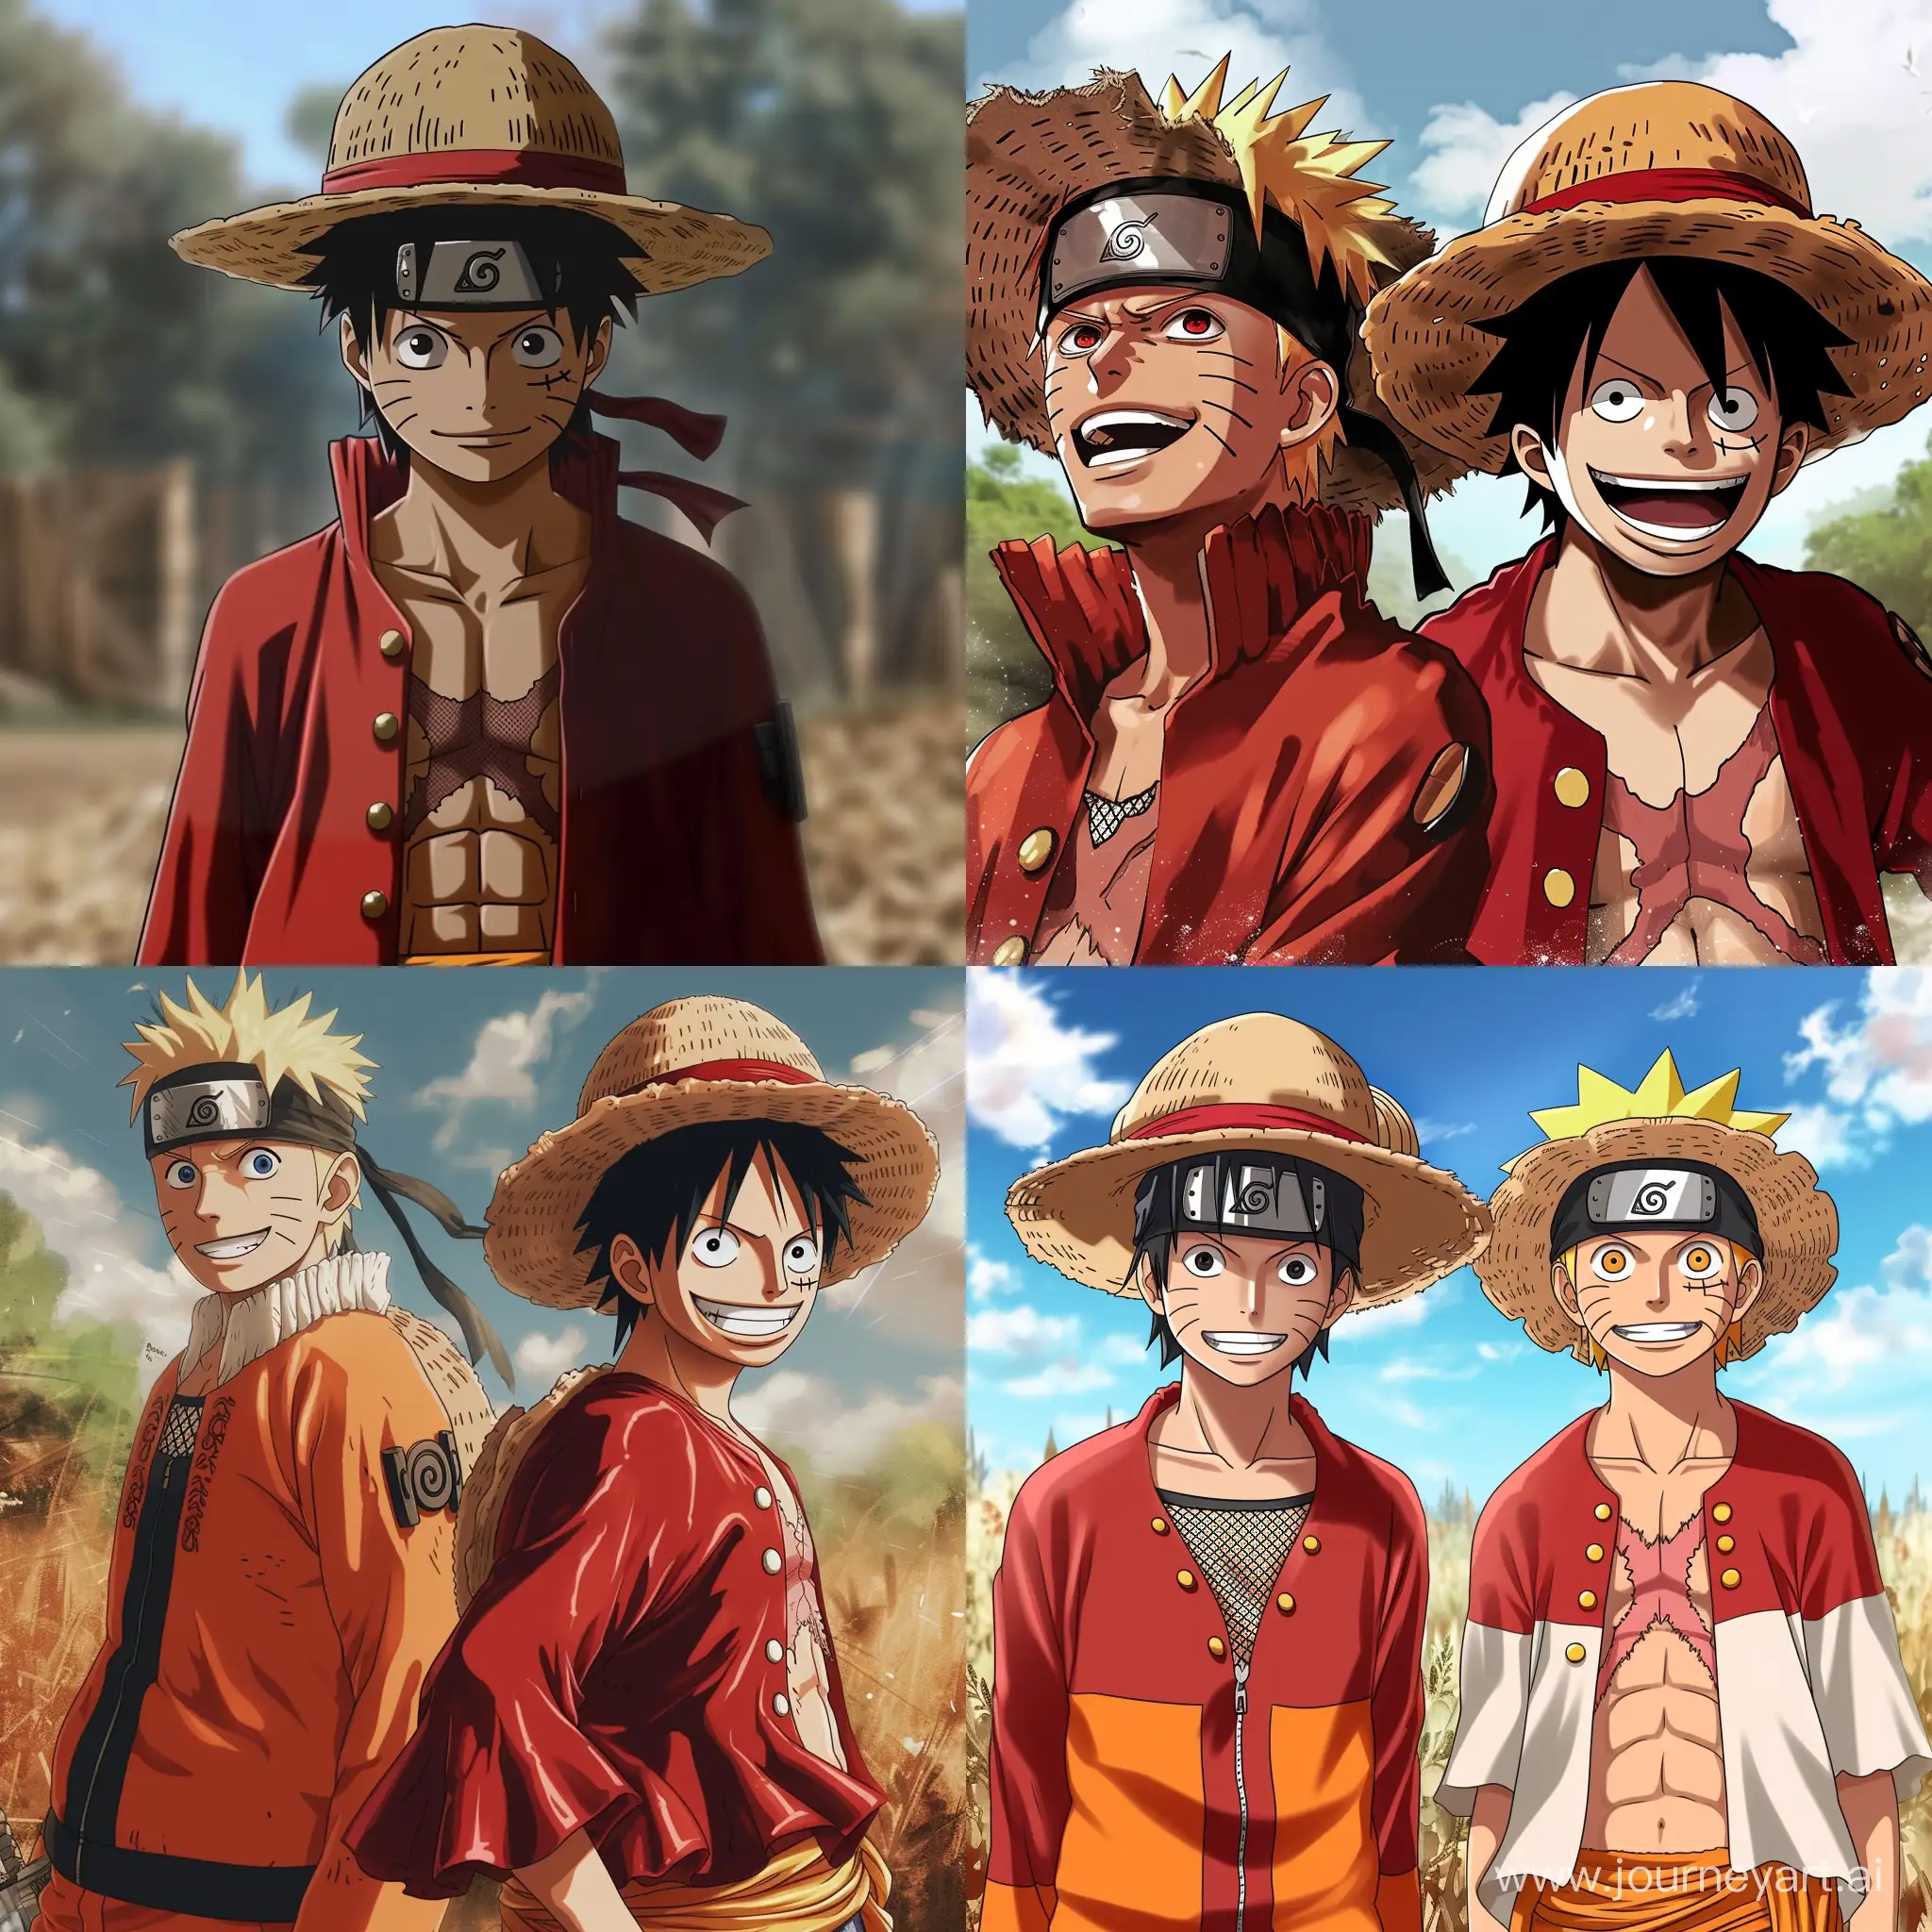 Epic-Fusion-of-Naruto-and-Monkey-D-Luffy-Art